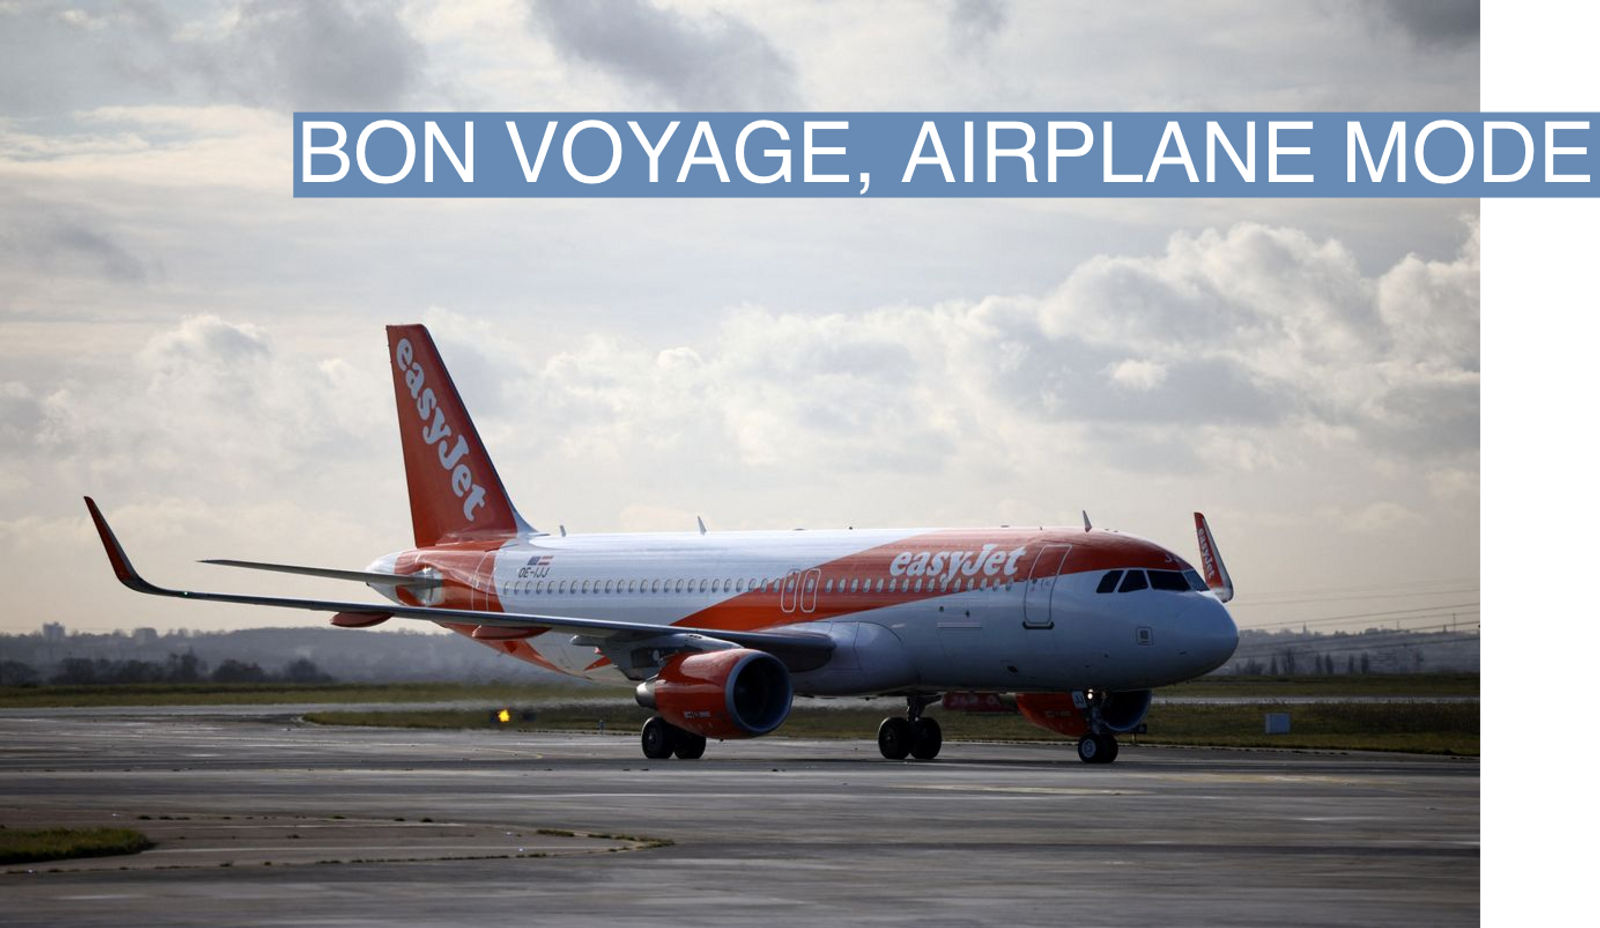 An EasyJet Airbus A320 plane takes off from Paris Charles de Gaulle airport in Roissy-en-France near Paris, France, December 2, 2021